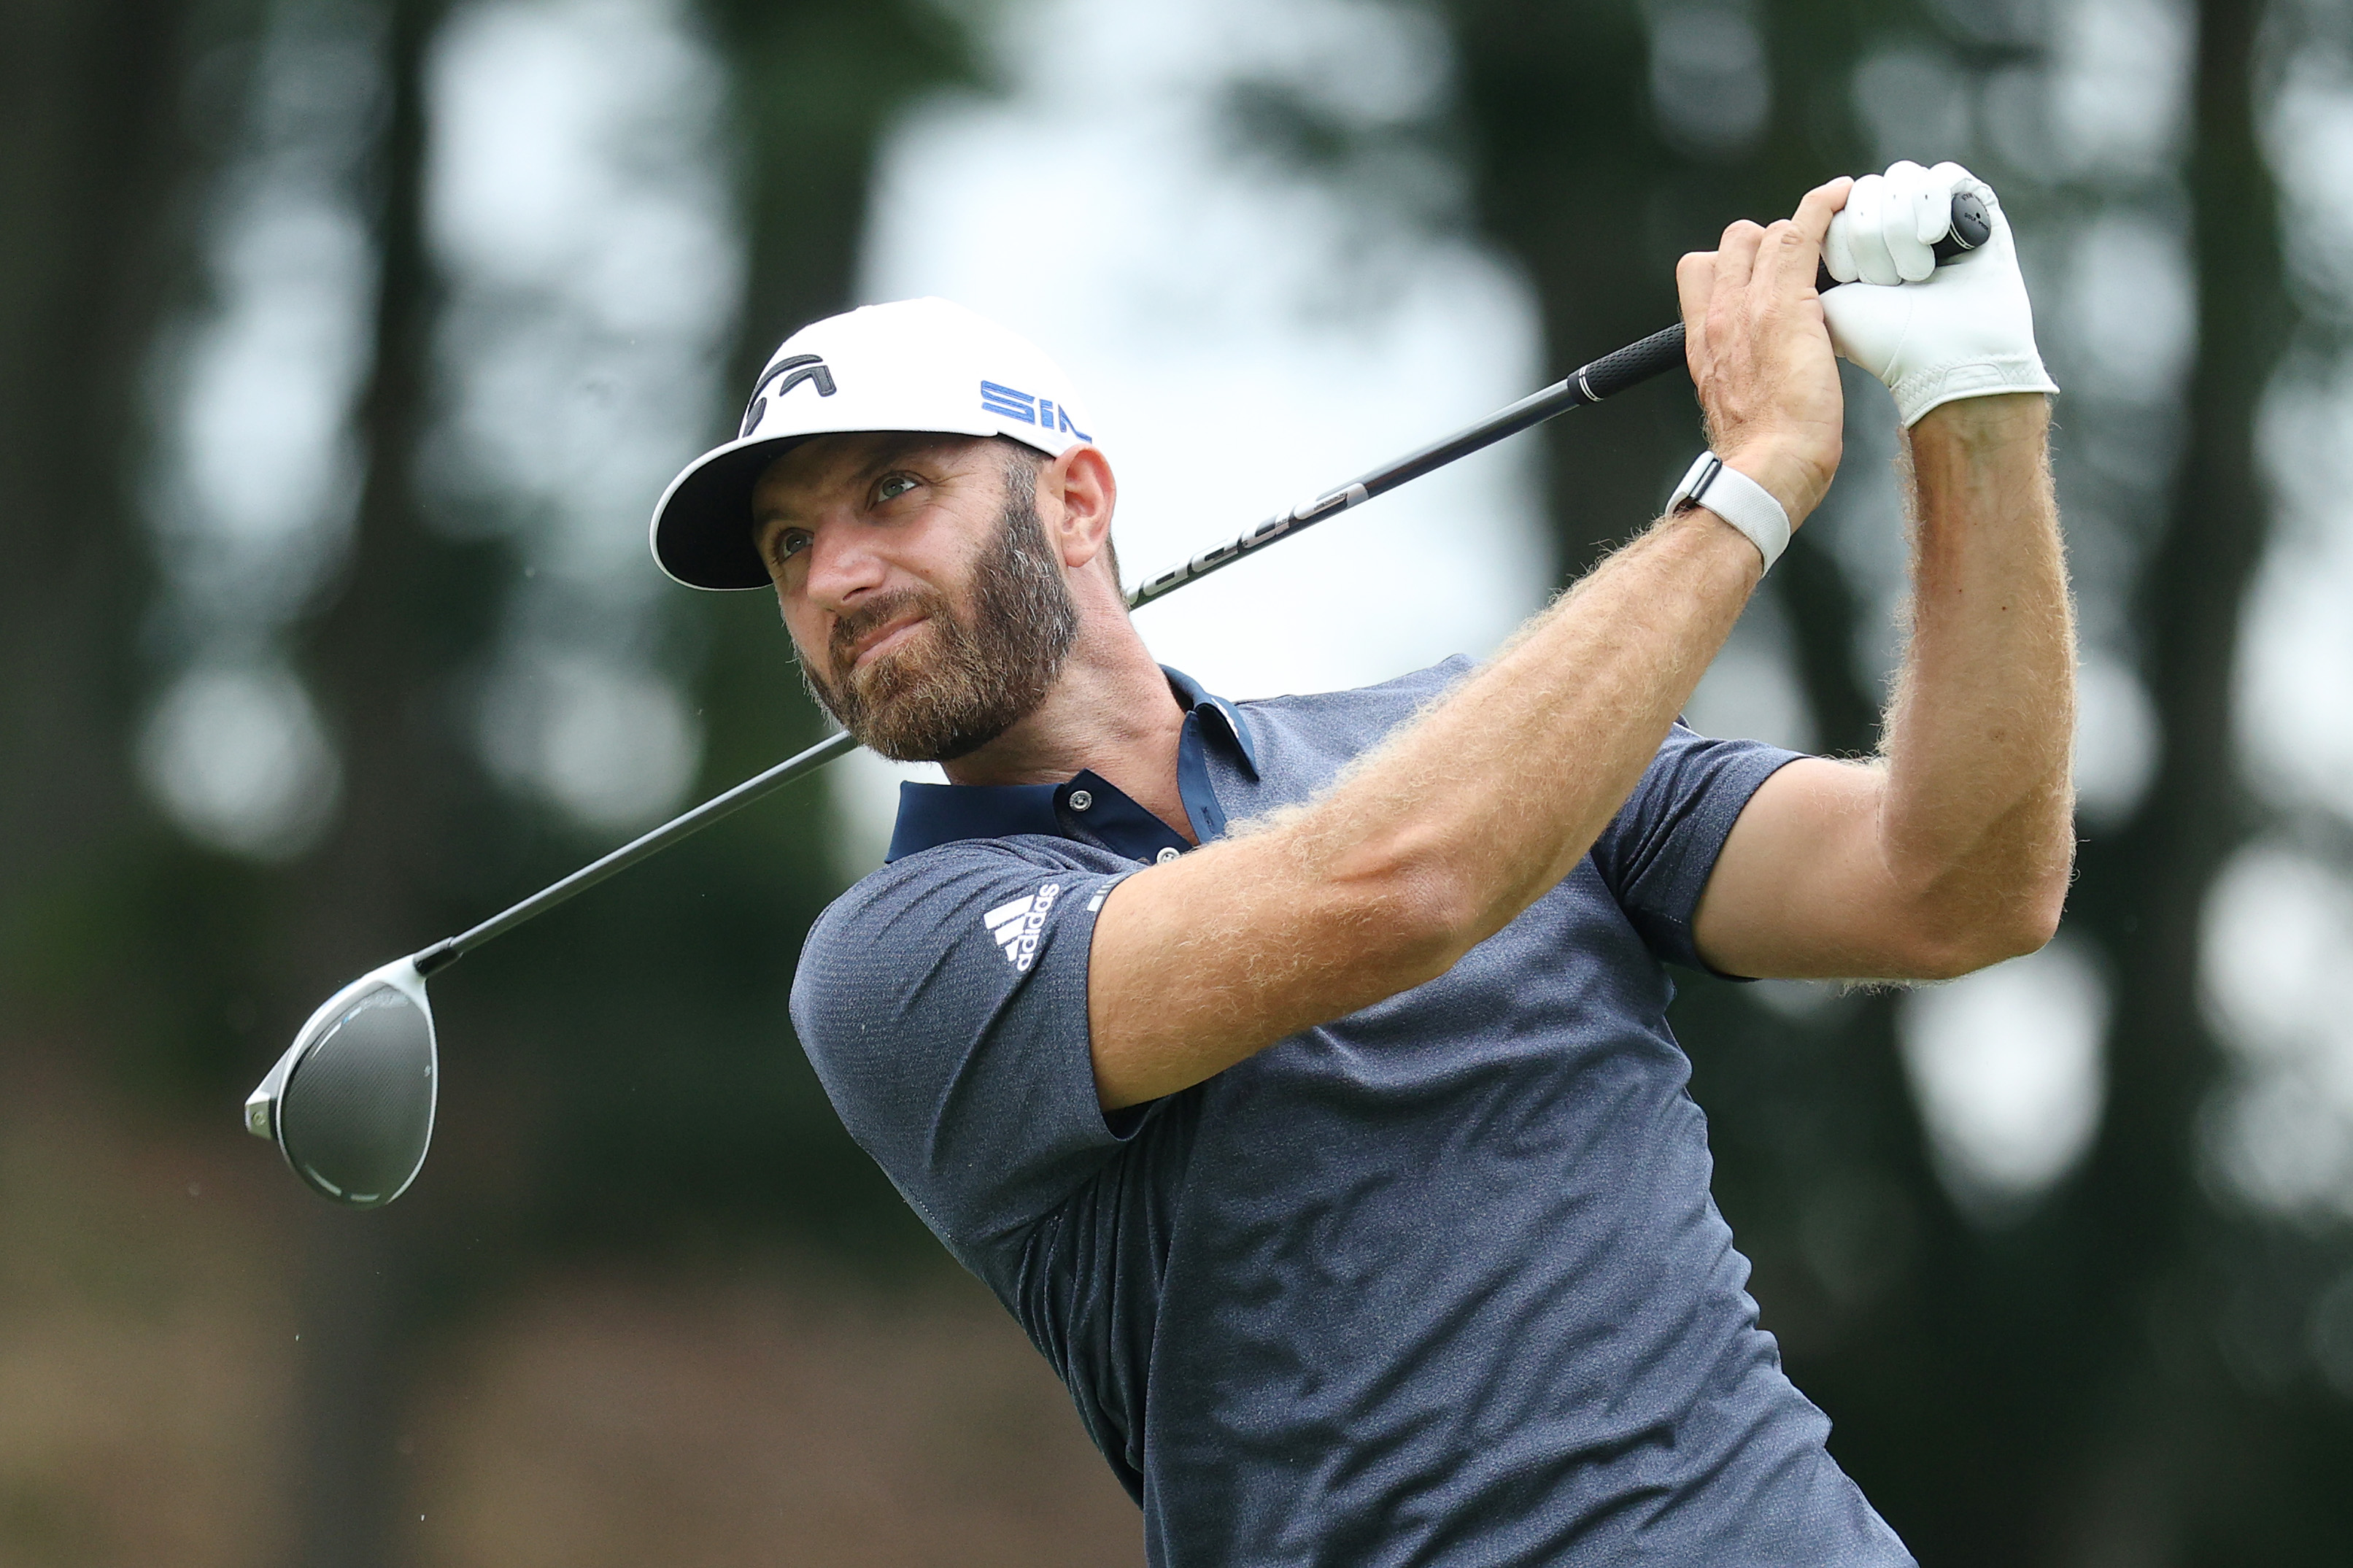 Dustin Johnson is a 20-time PGA Tour winner, but his path to the top was riddled with drug use and major championship heartbreak.